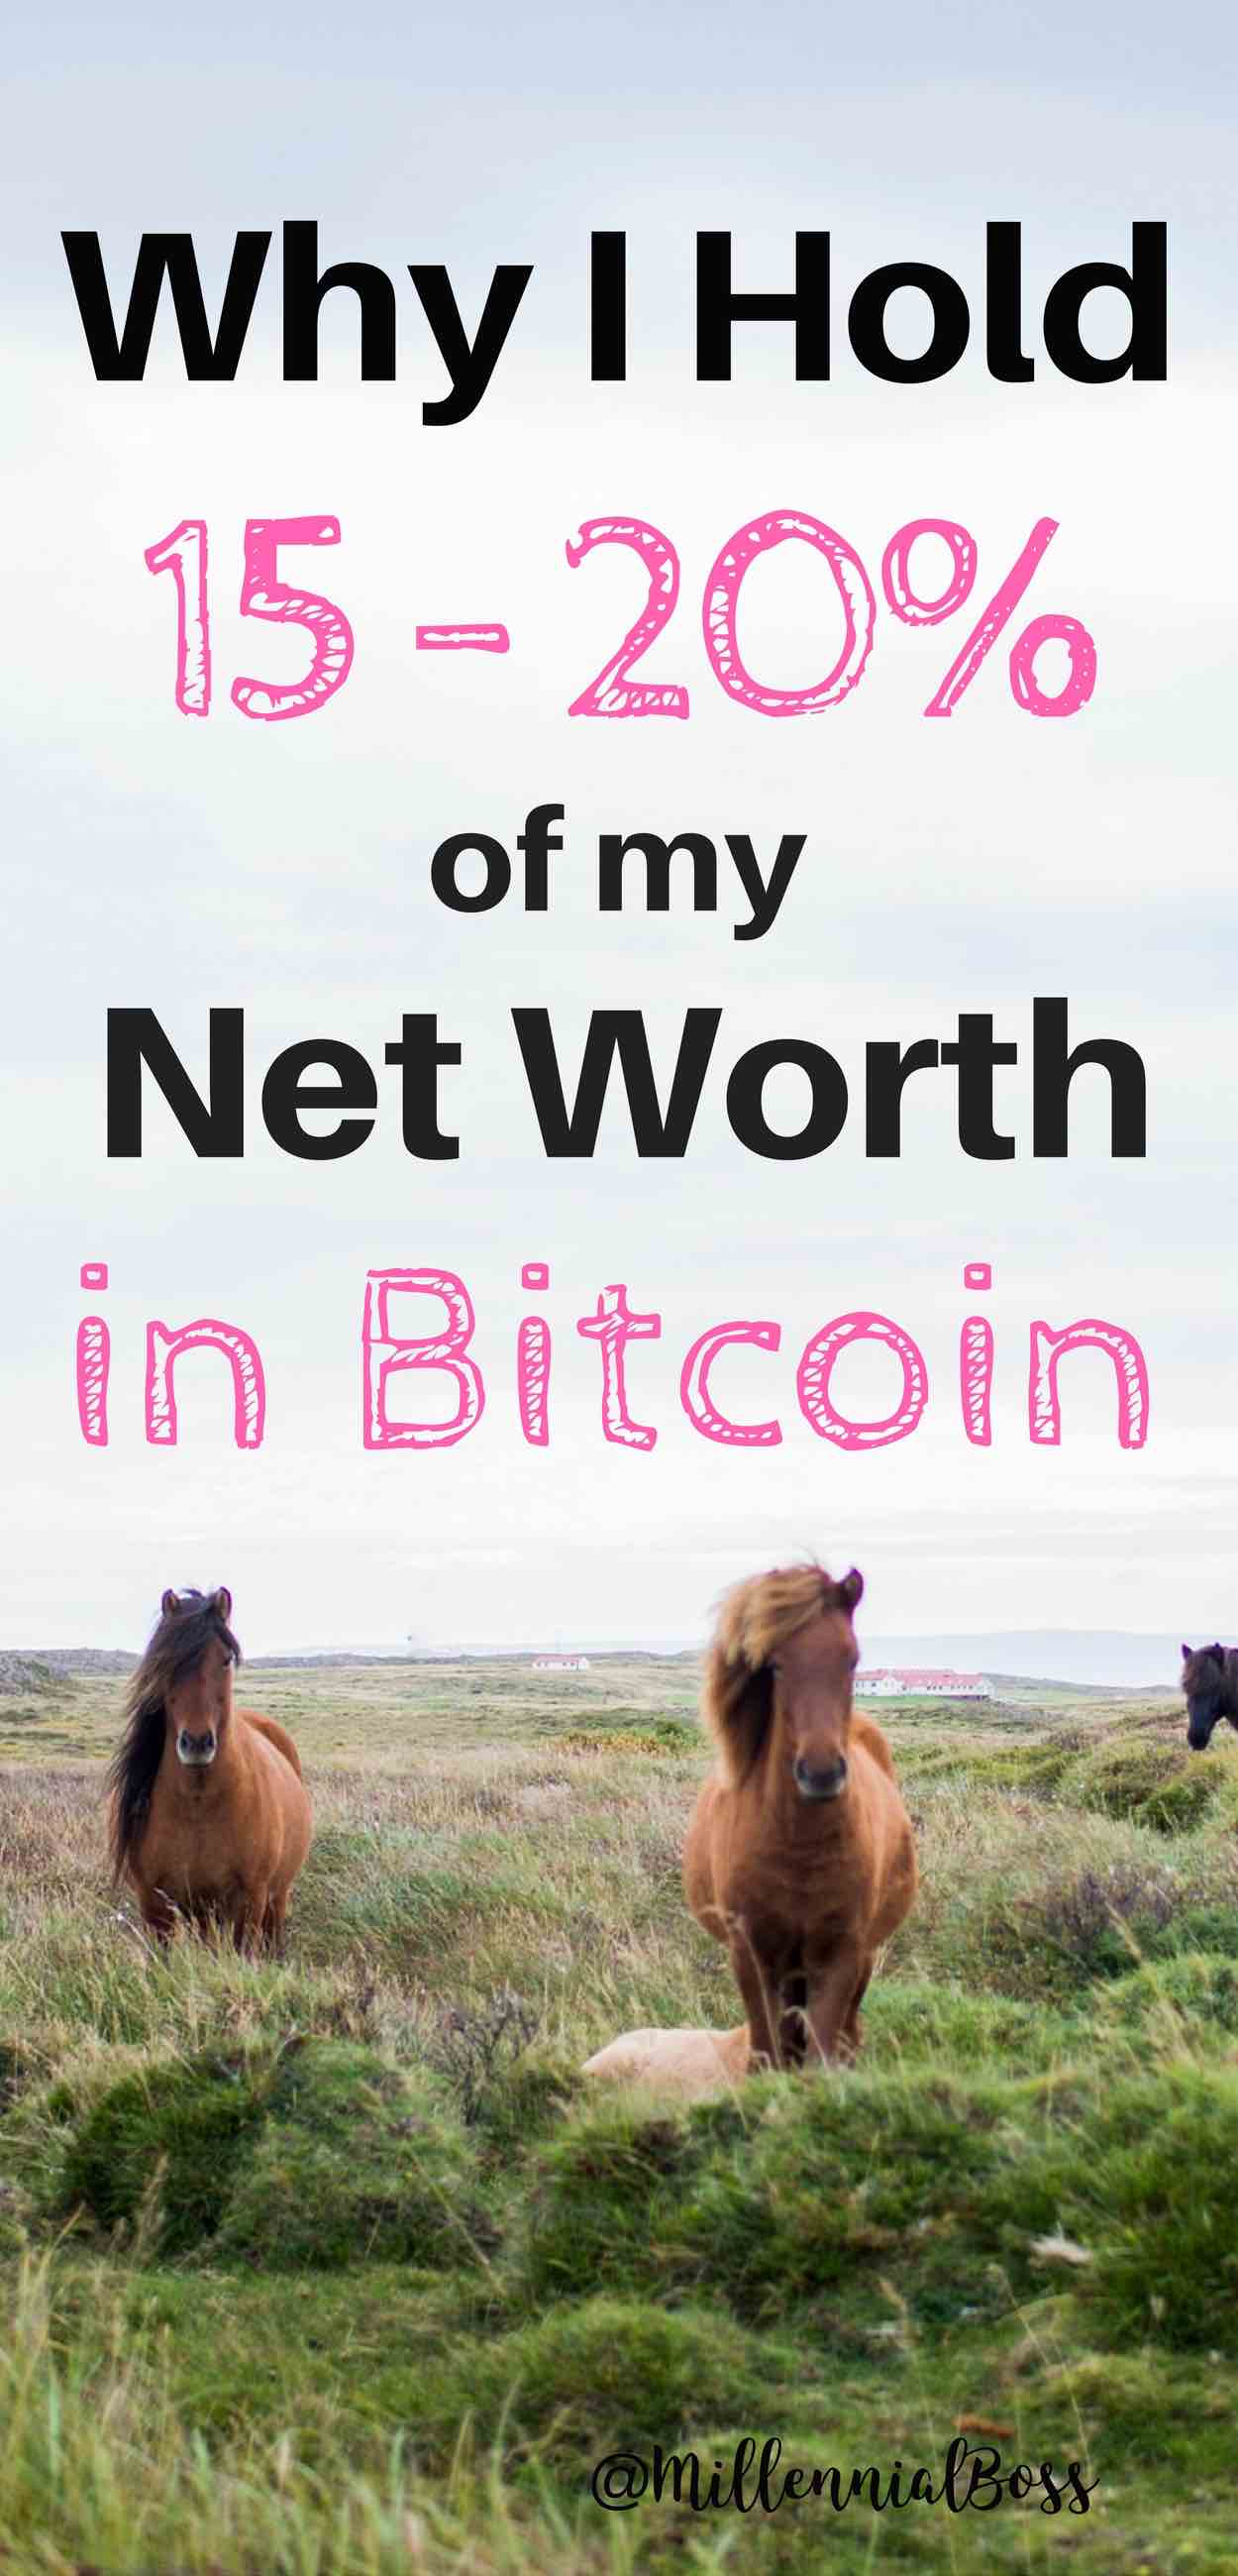 George shares why he puts almost 20 percent of his net worth in bitcoin , Ether, and other forms of cryptocurrency